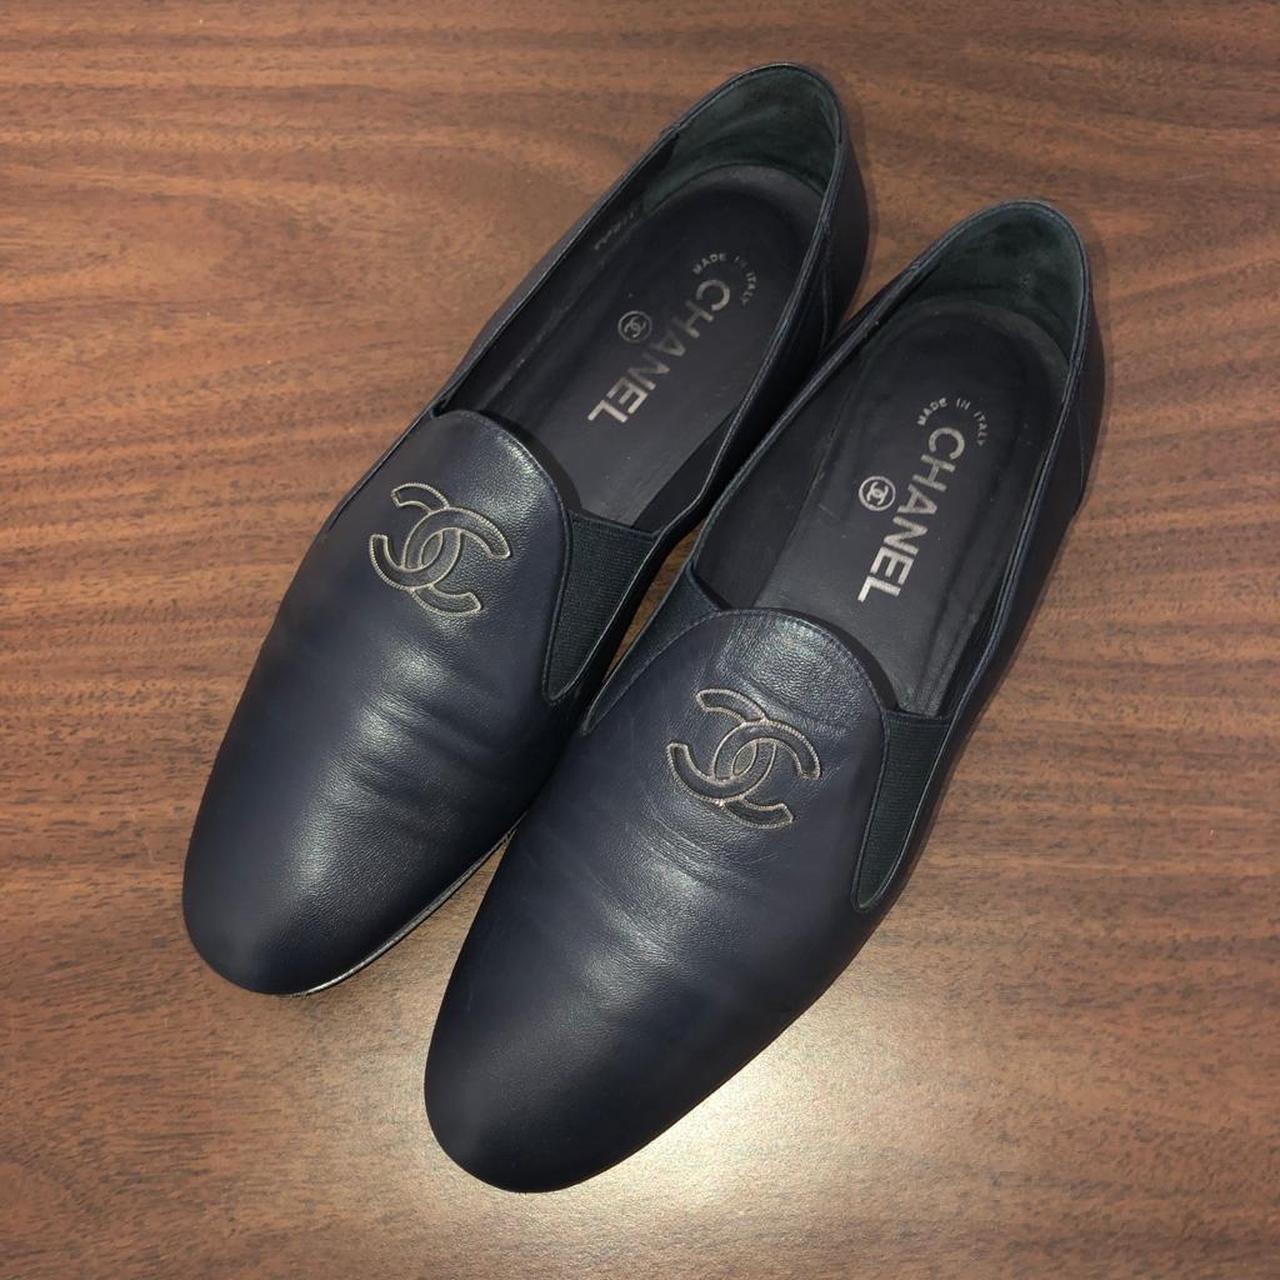 Chanel Women's Loafers - Navy - US 10.5